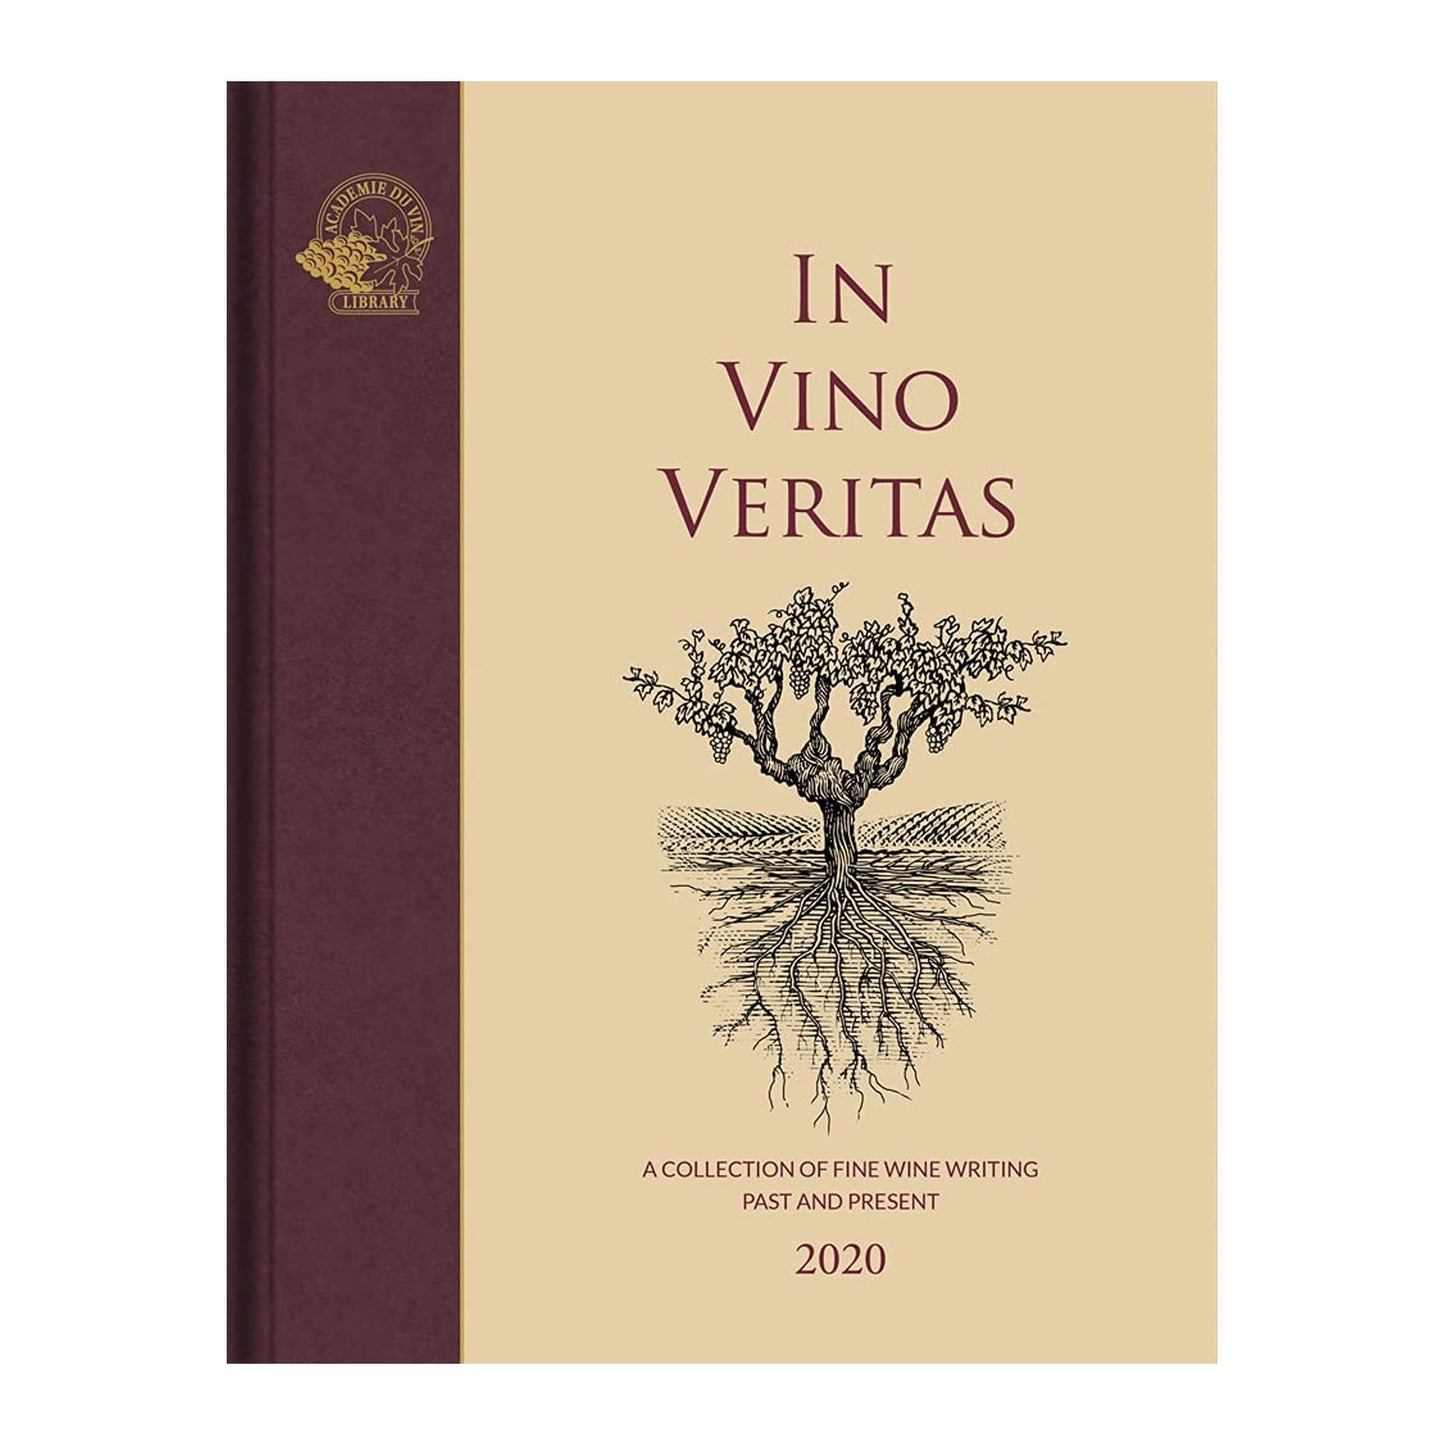 In Vino Veritas: A Collection of Fine Wine Writing Past and Present